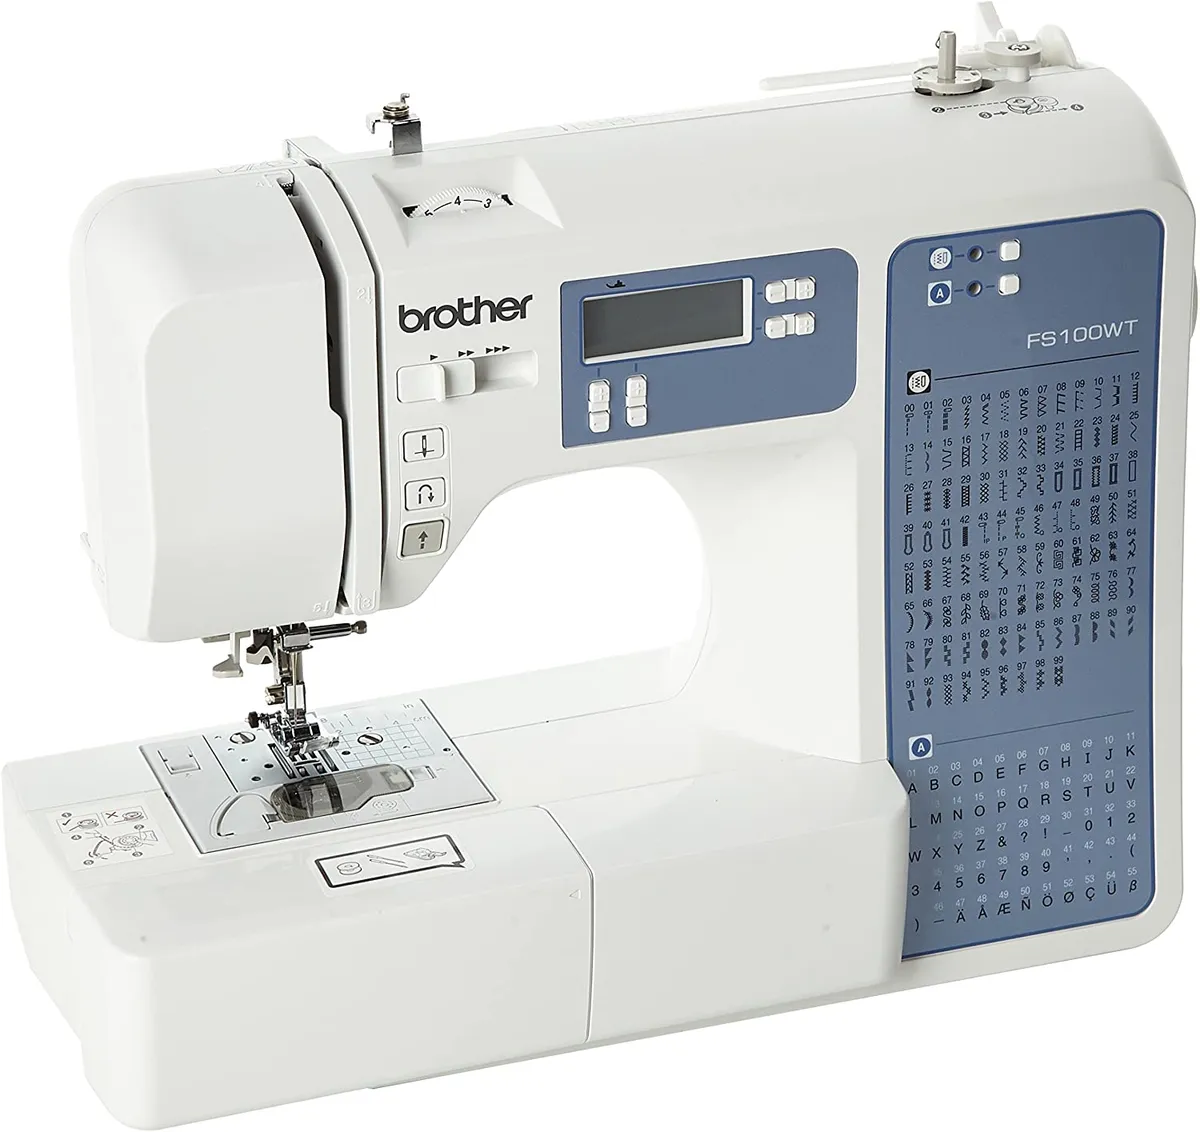 embroidery sewing machine FS100